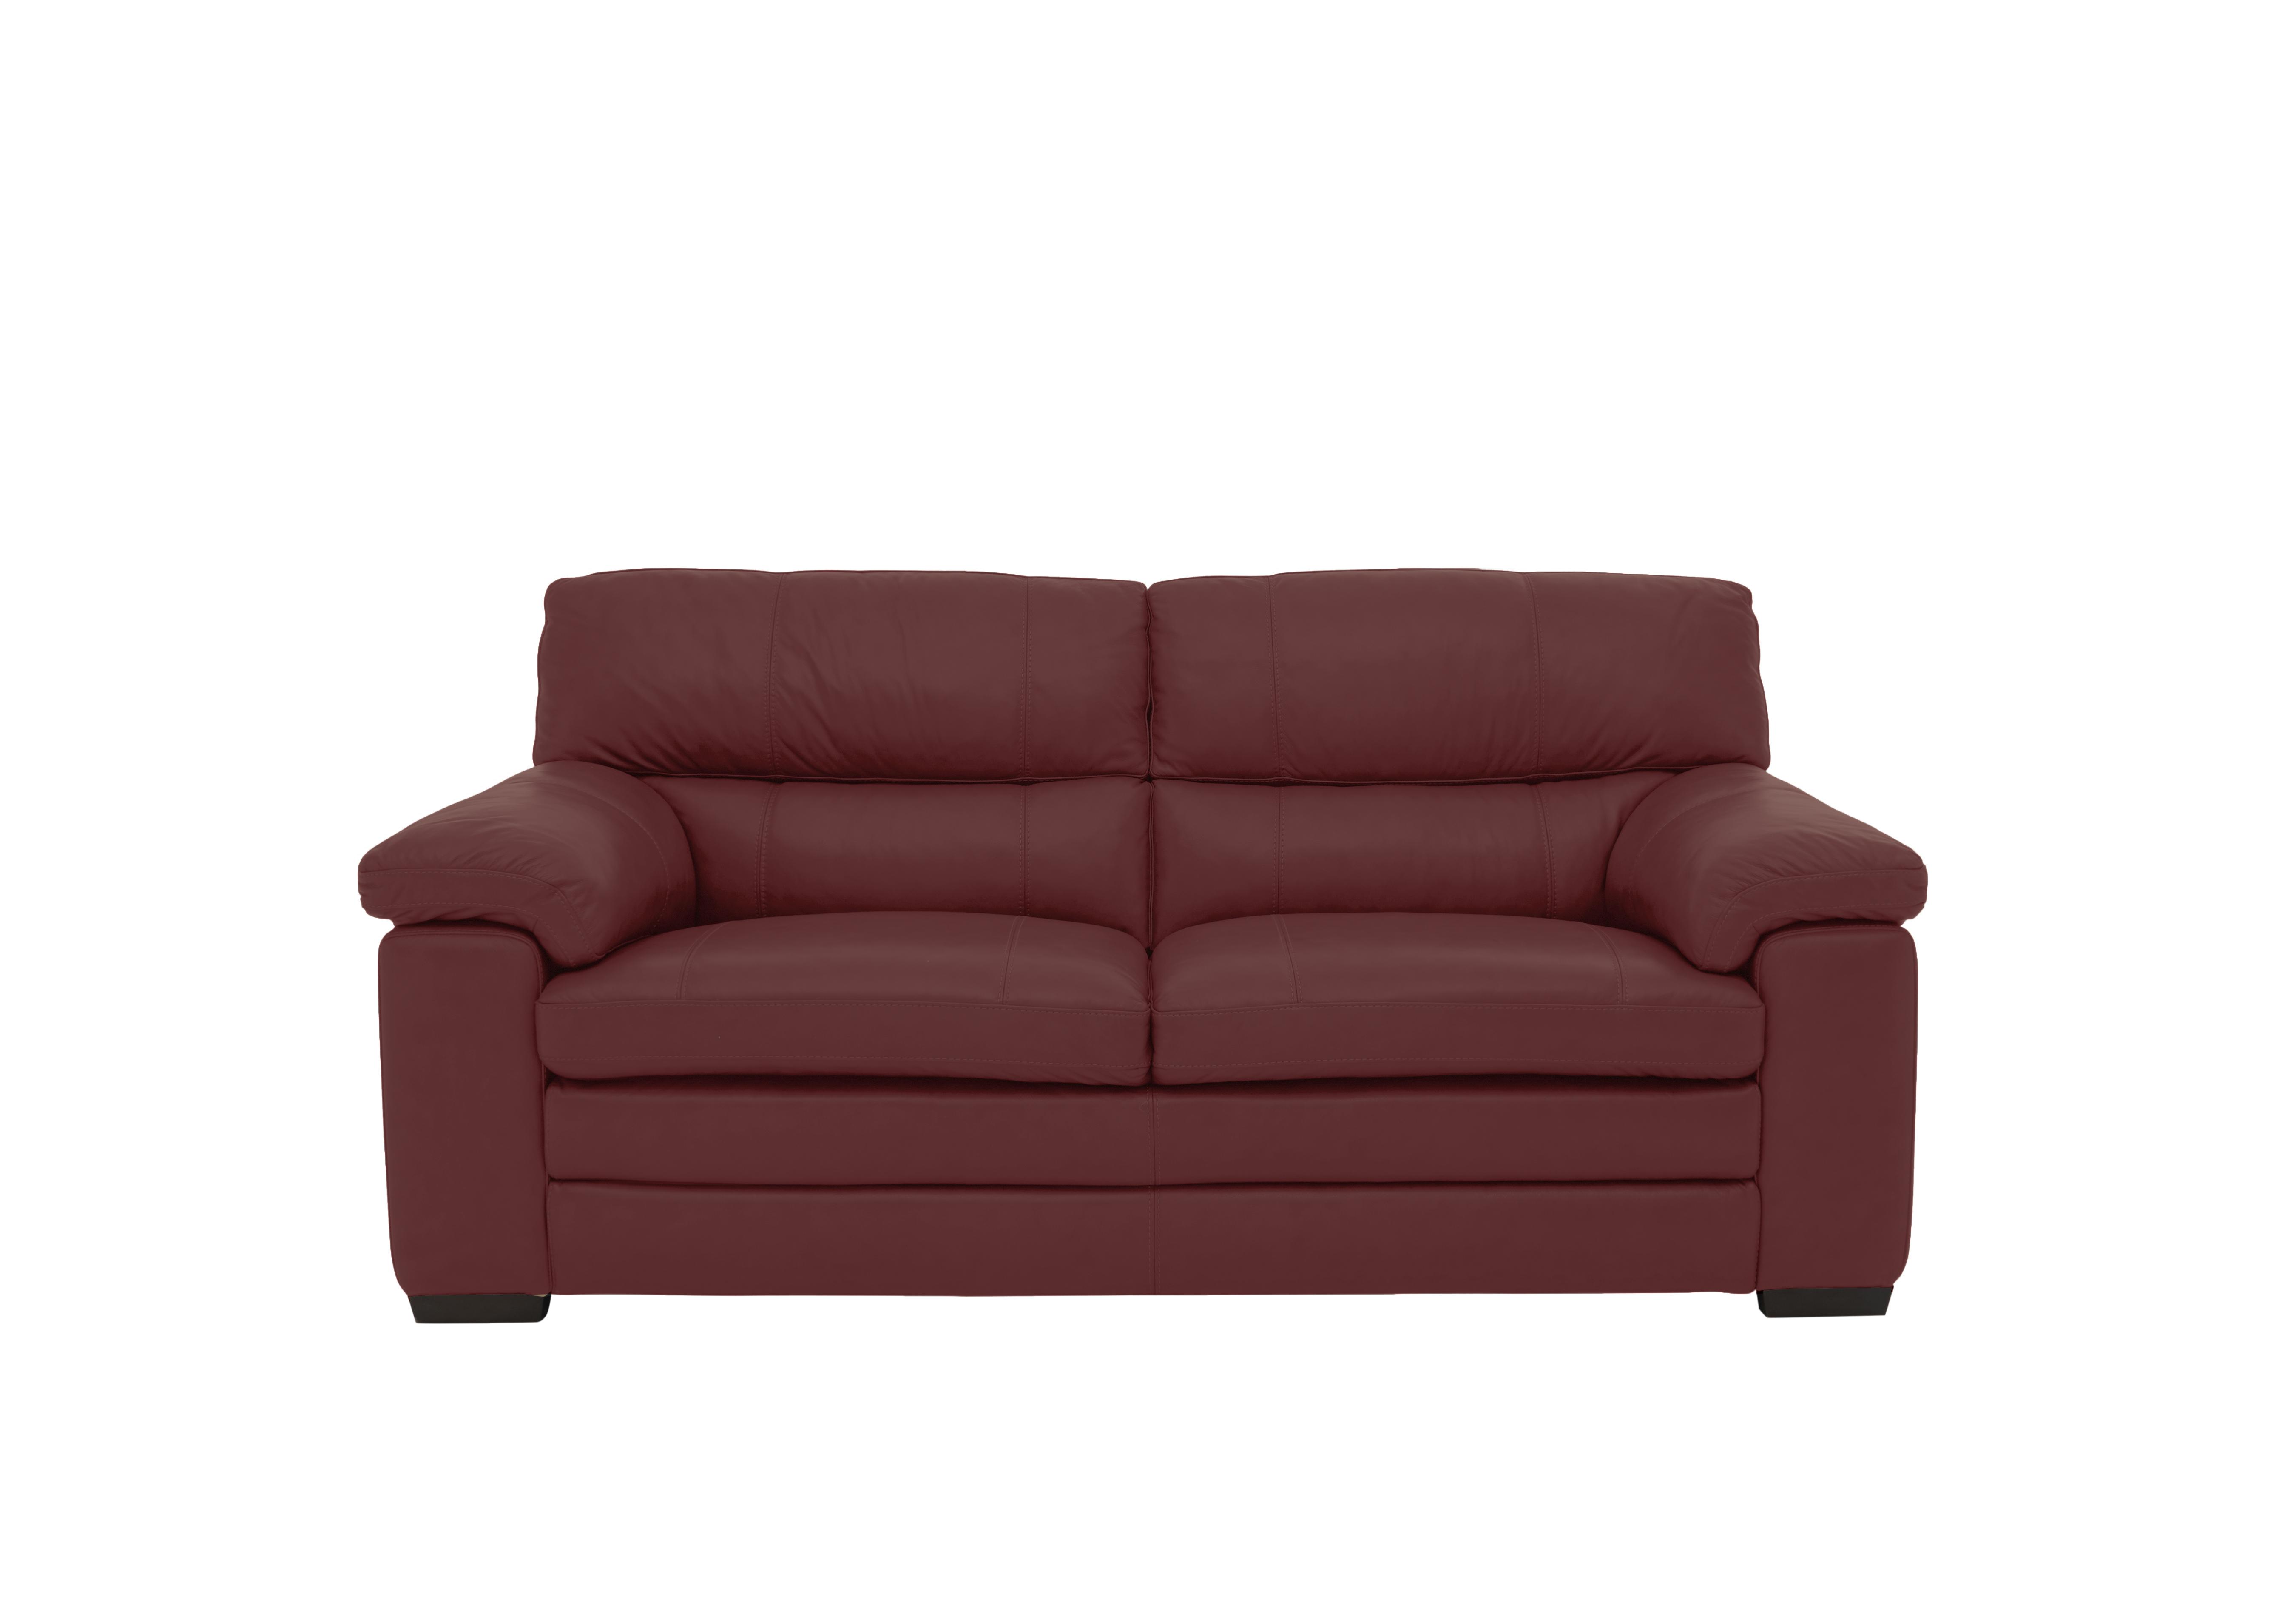 Cozee 2 Seater Pure Premium Leather Sofa in Bv-035c Deep Red on Furniture Village